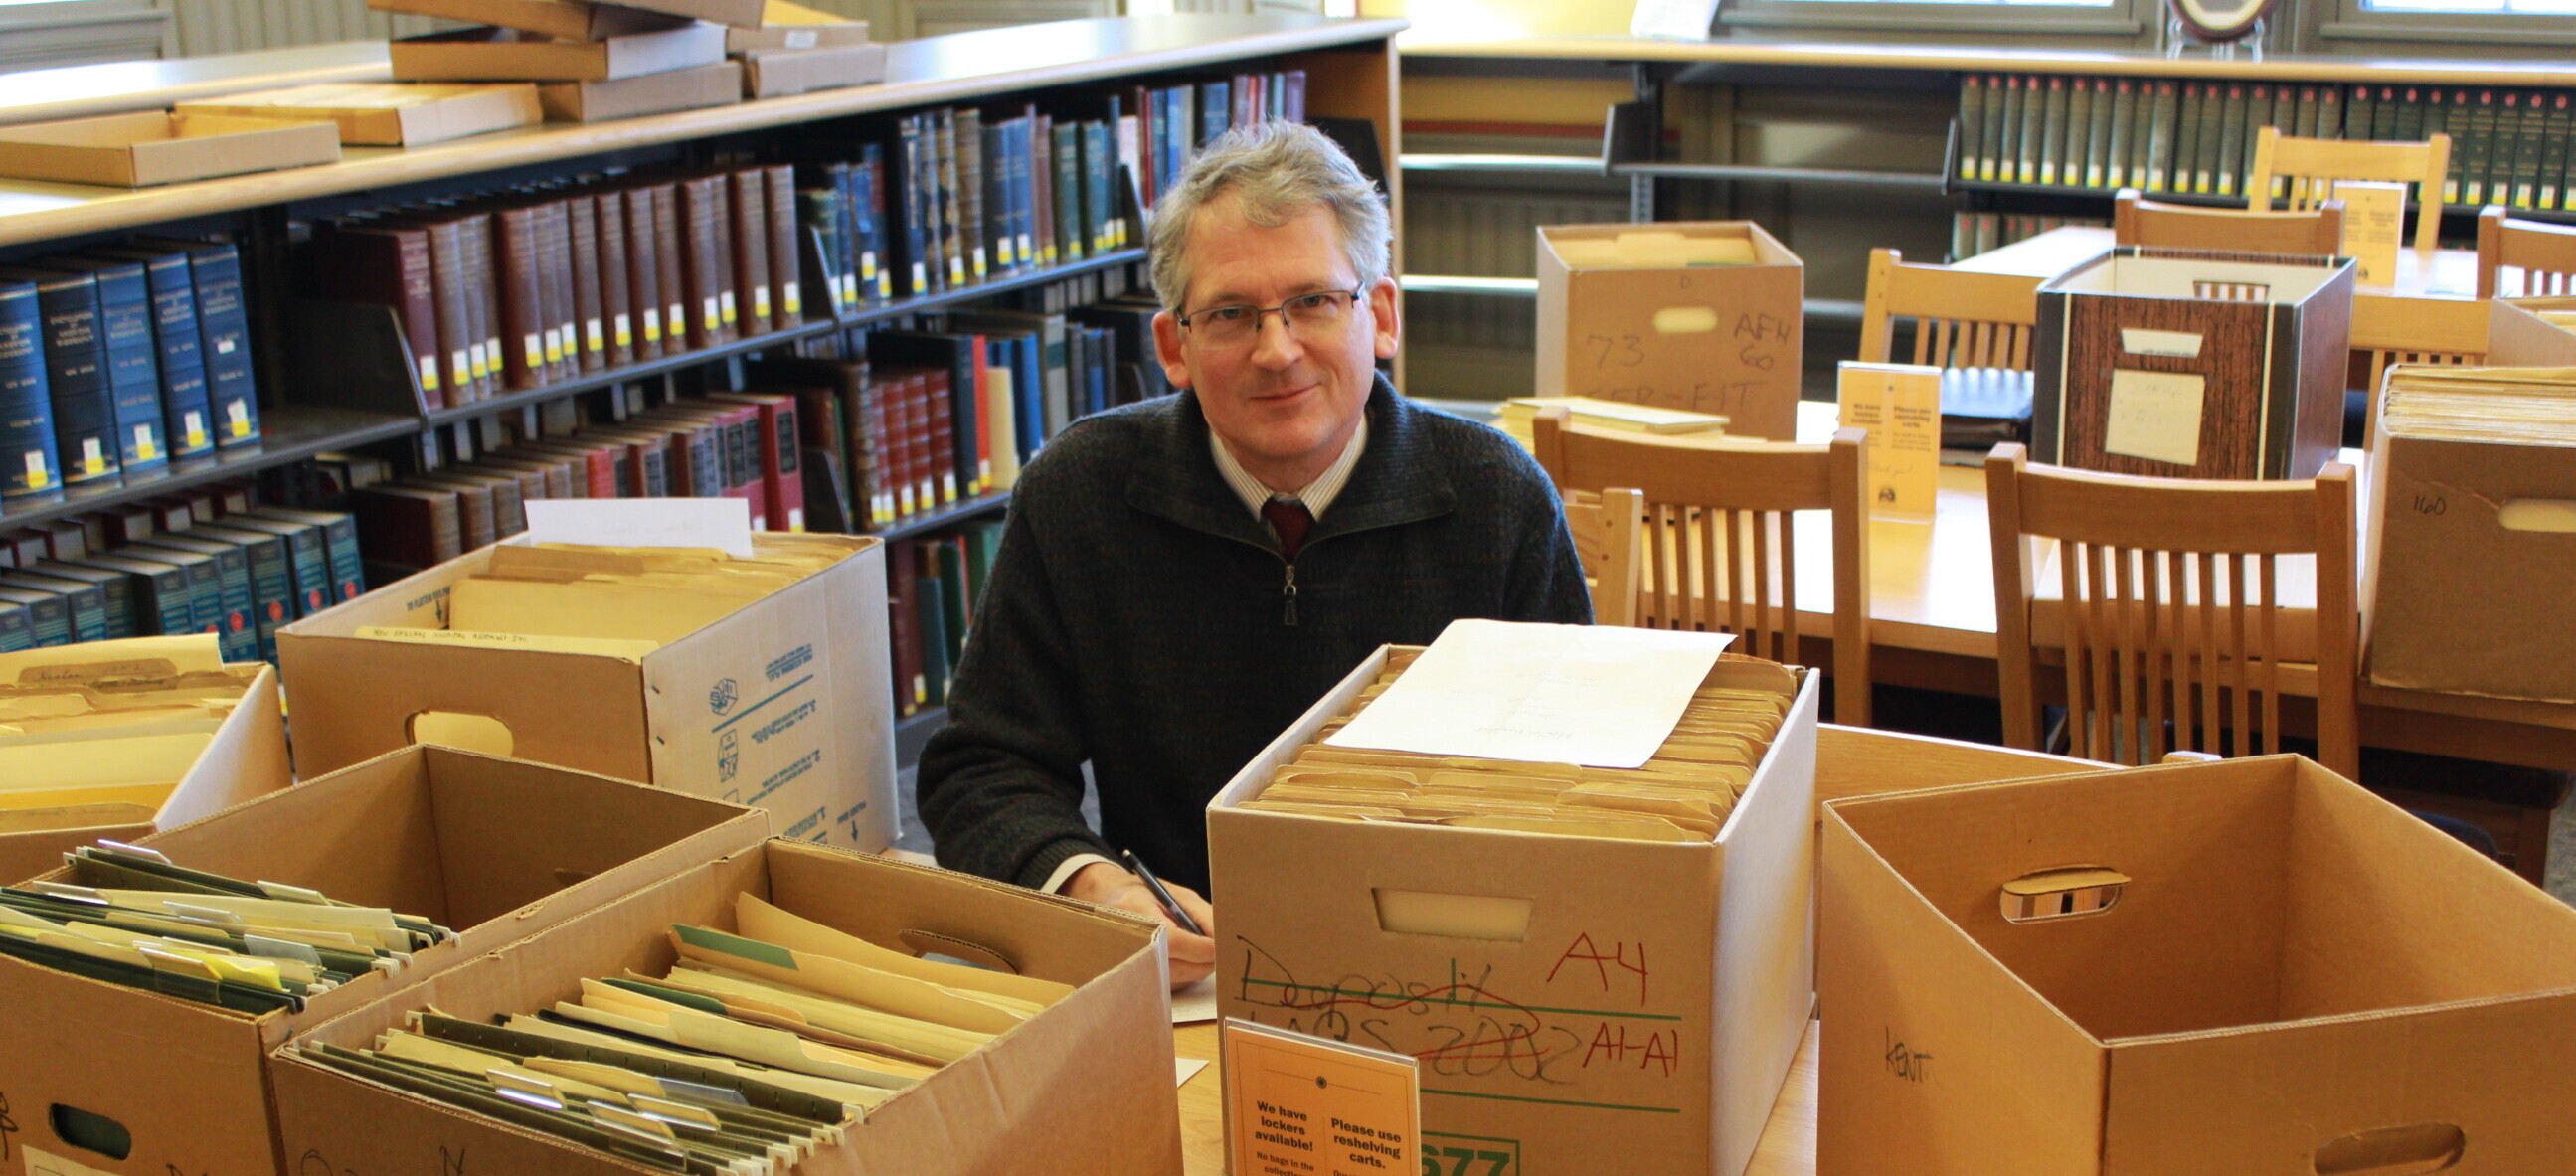 image of Paul Carnahan, VHS Librarian, sitting at a table with boxes of archival materials